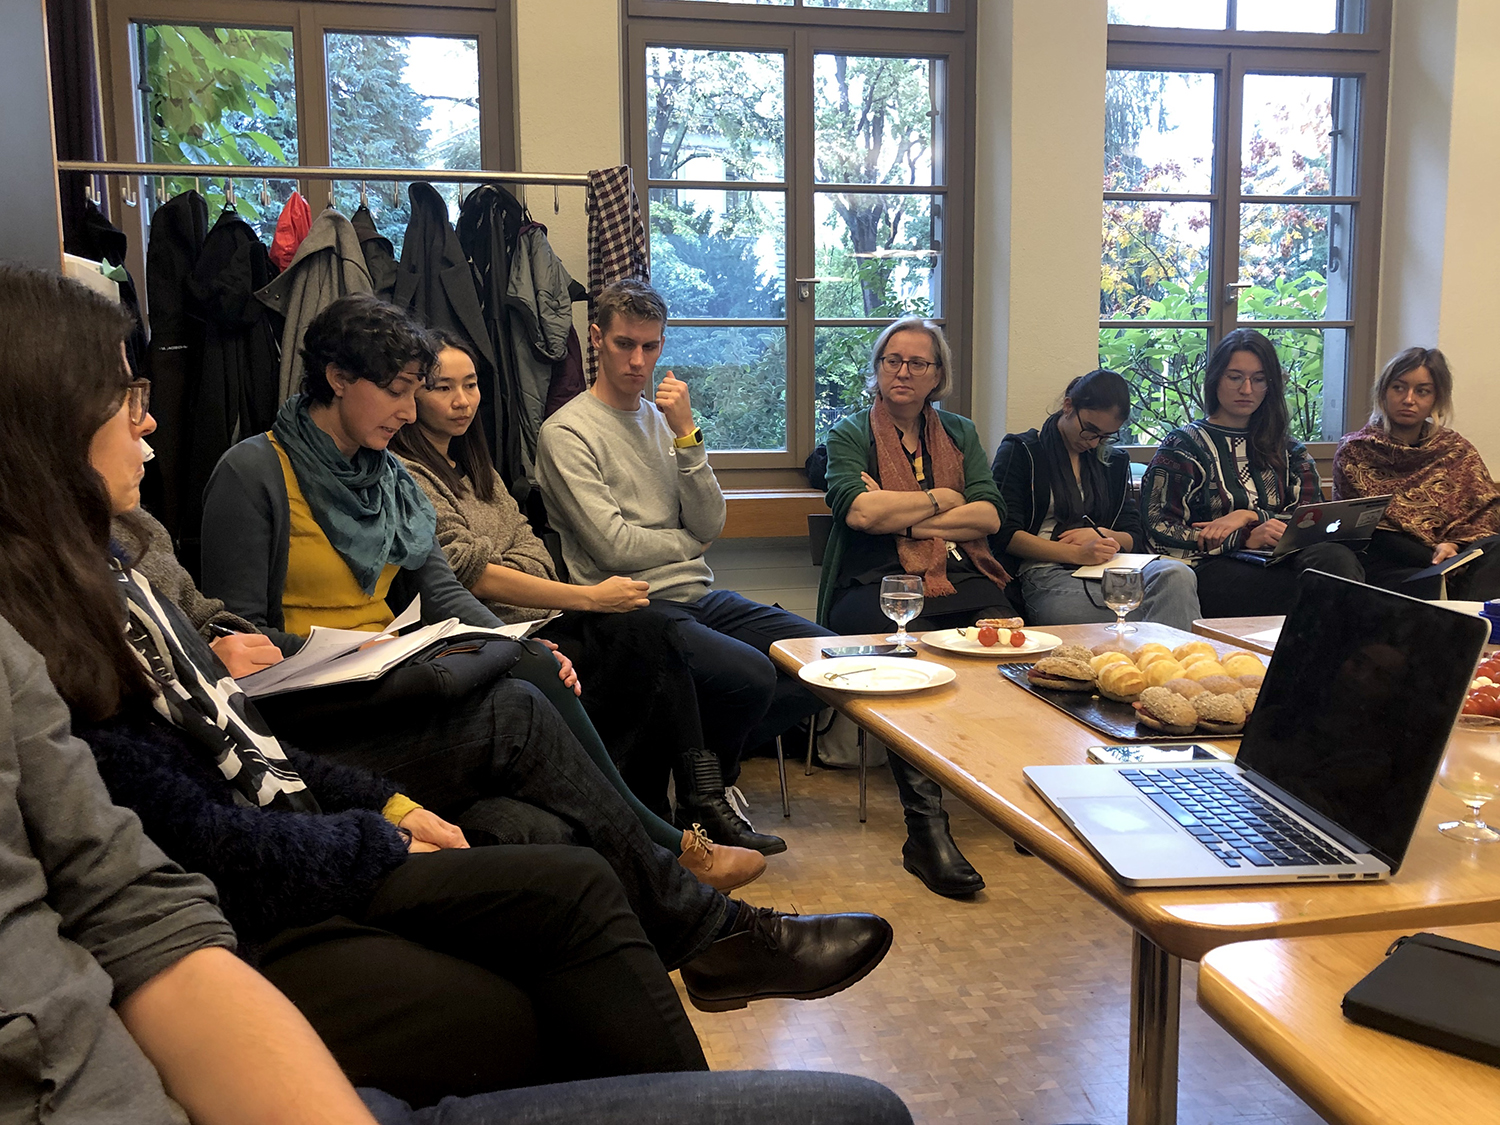 Listening to vignettes presented by ISEK students and staff during "Tag der Lehre", 30th of October 2019